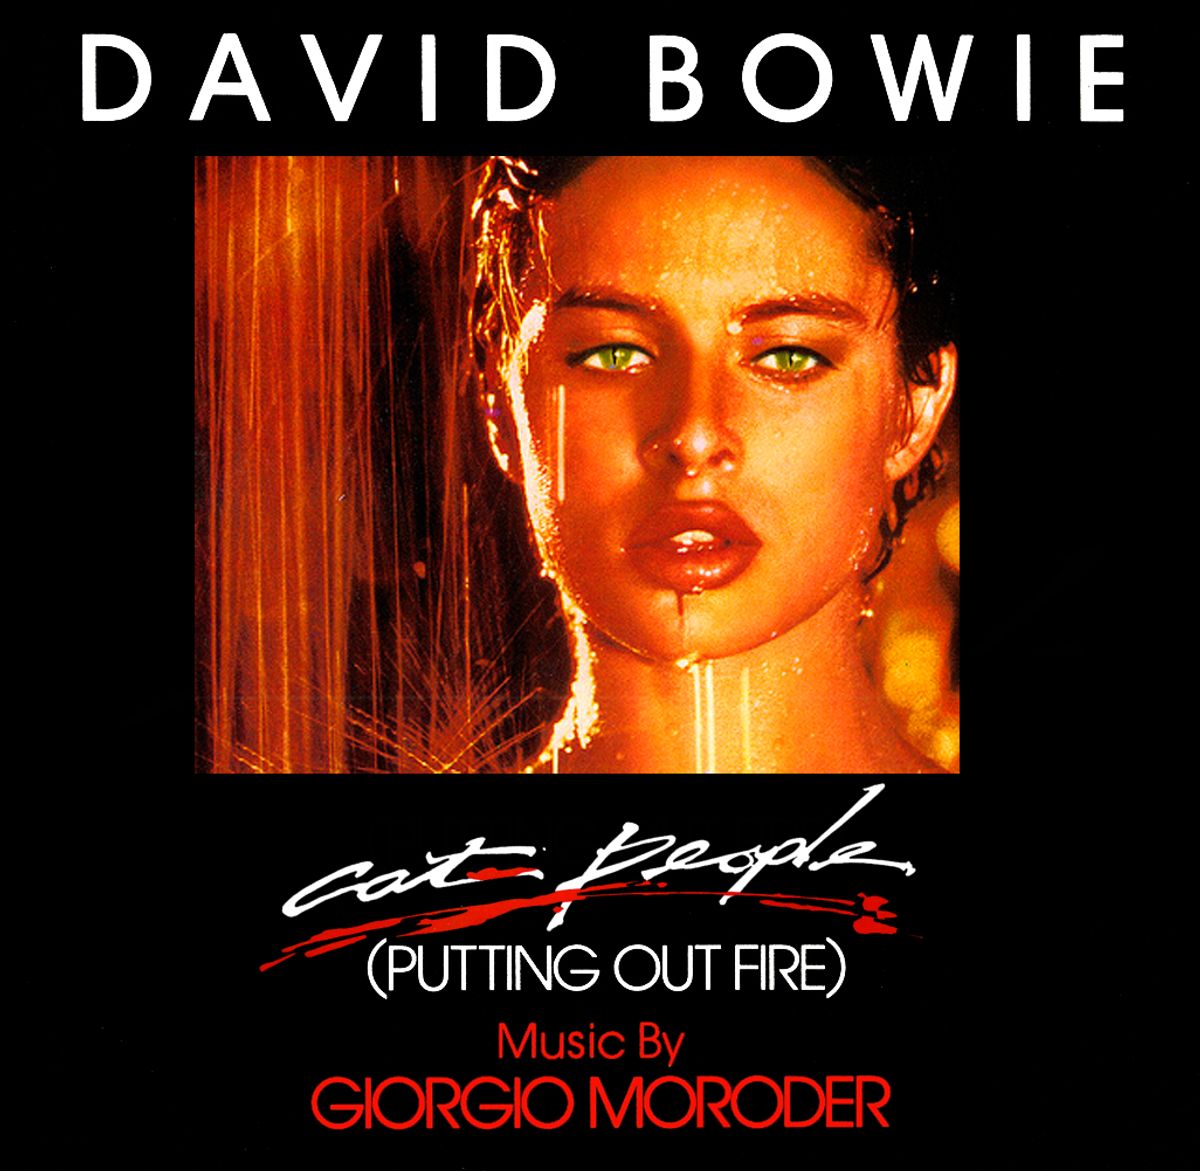 #BowieSteunt - David Bowie / Giorgio Moroder - Cat People (Putting Out Fire